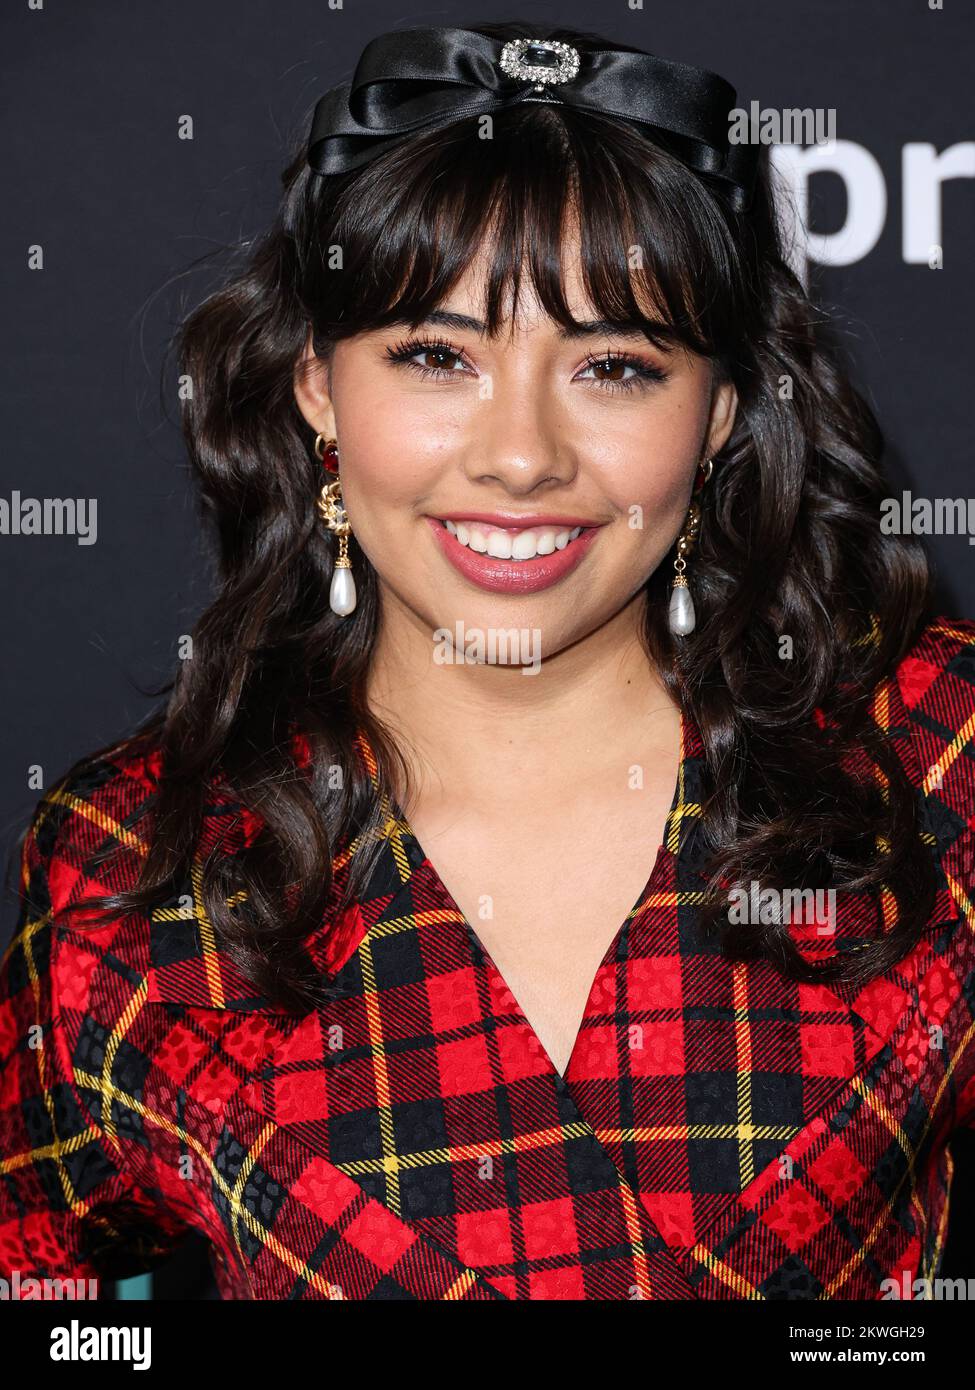 CENTURY CITY, LOS ANGELES, CALIFORNIA, USA - NOVEMBER 29: American actress Xochitl Gomez arrives at the Los Angeles Premiere Of Amazon Prime Video's 'Something From Tiffany's' held at AMC Century City 15 at Westfield Century City on November 29, 2022 in Century City, Los Angeles, California, United States. (Photo by Xavier Collin/Image Press Agency) Stock Photo